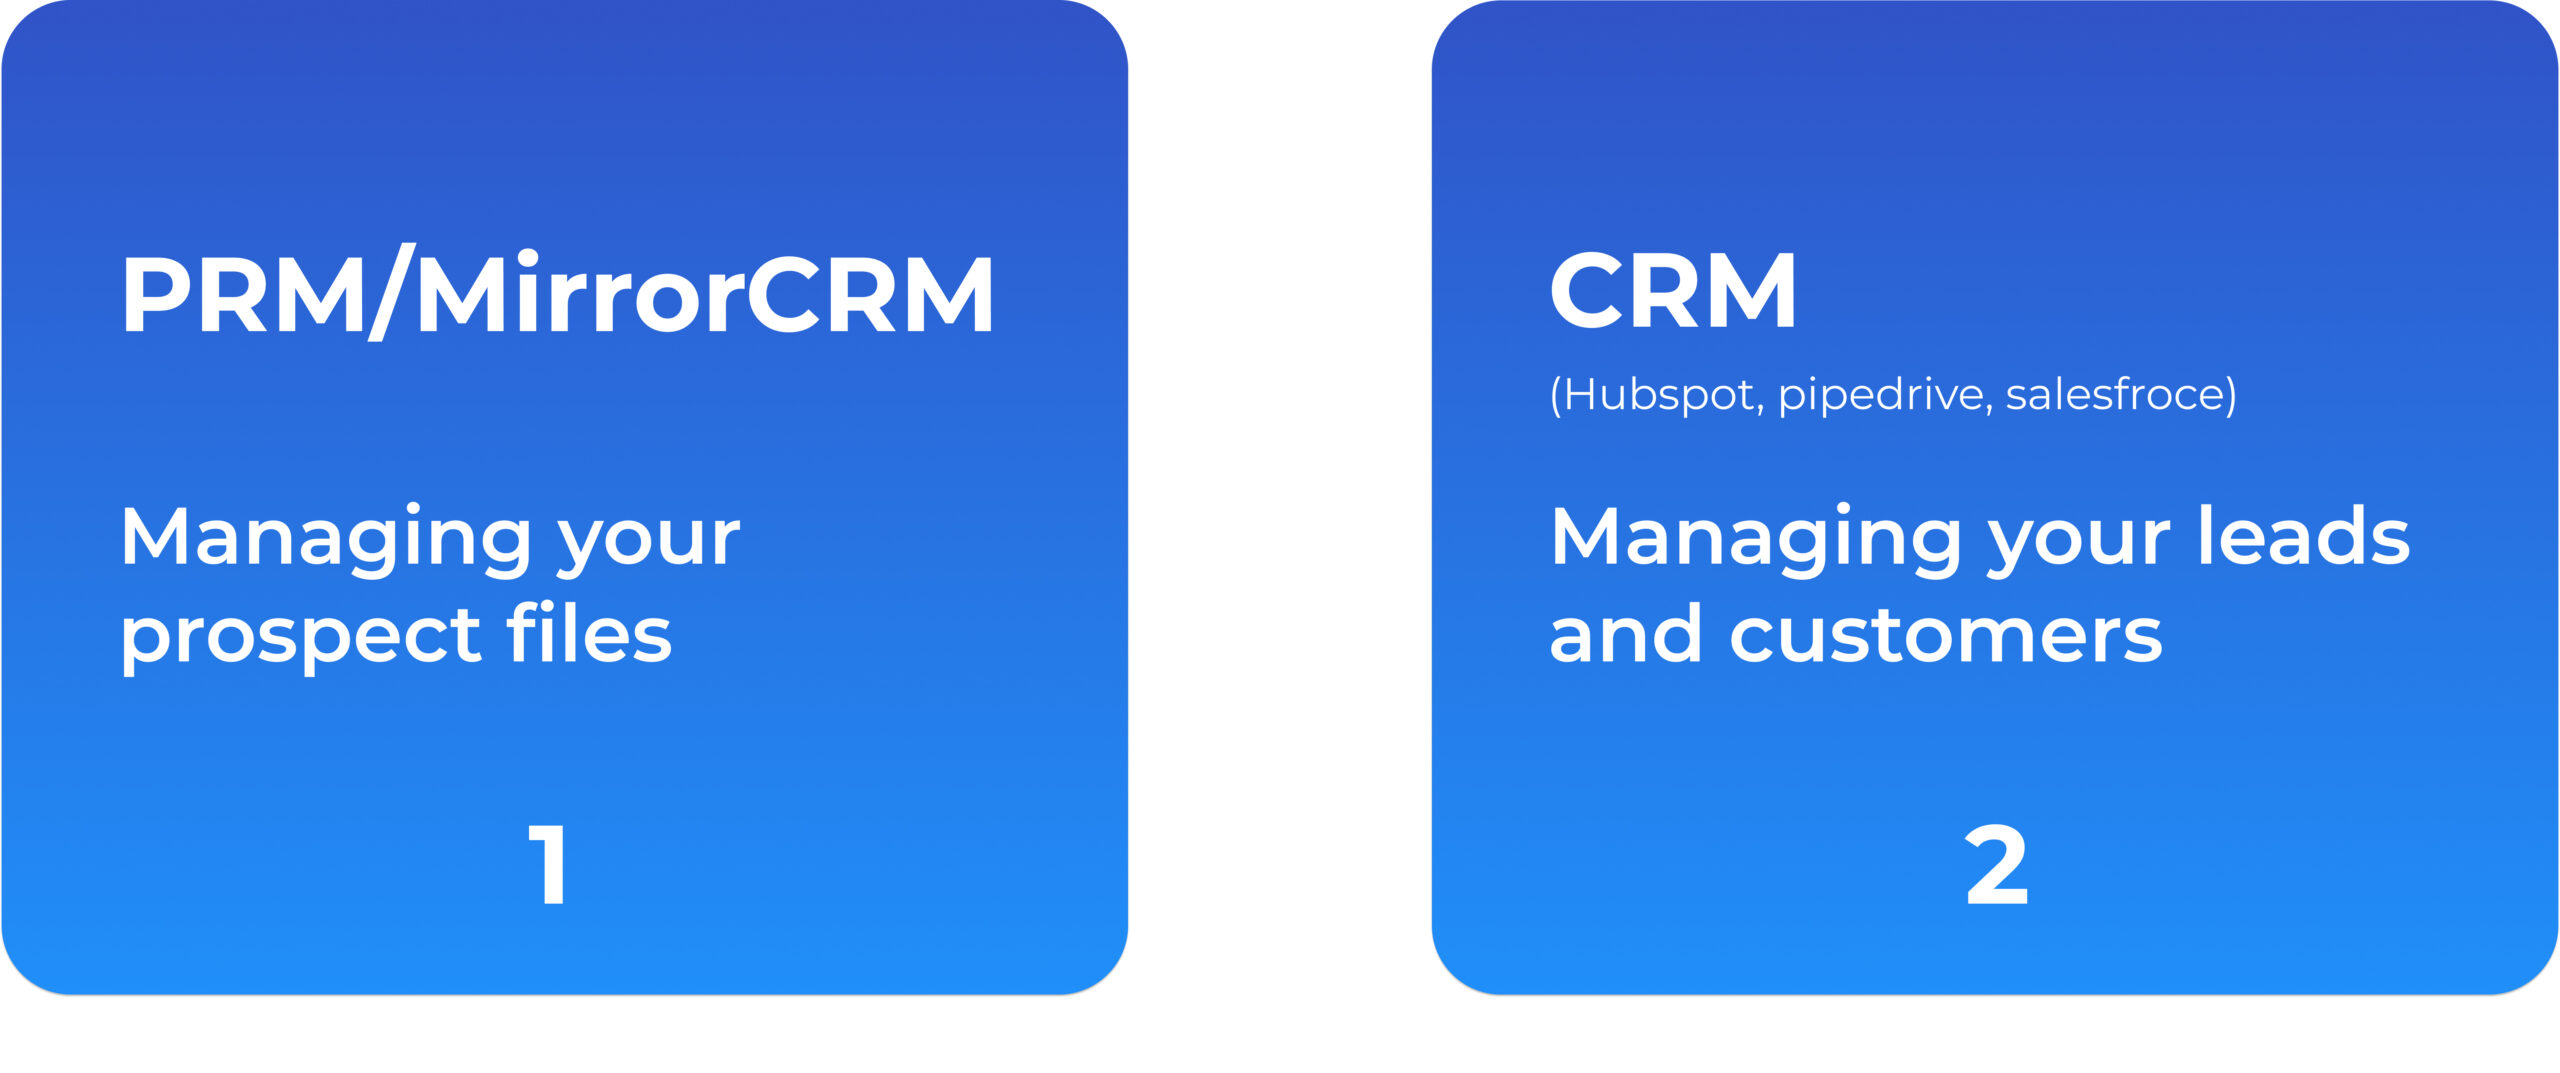 The difference between PRM and CRM